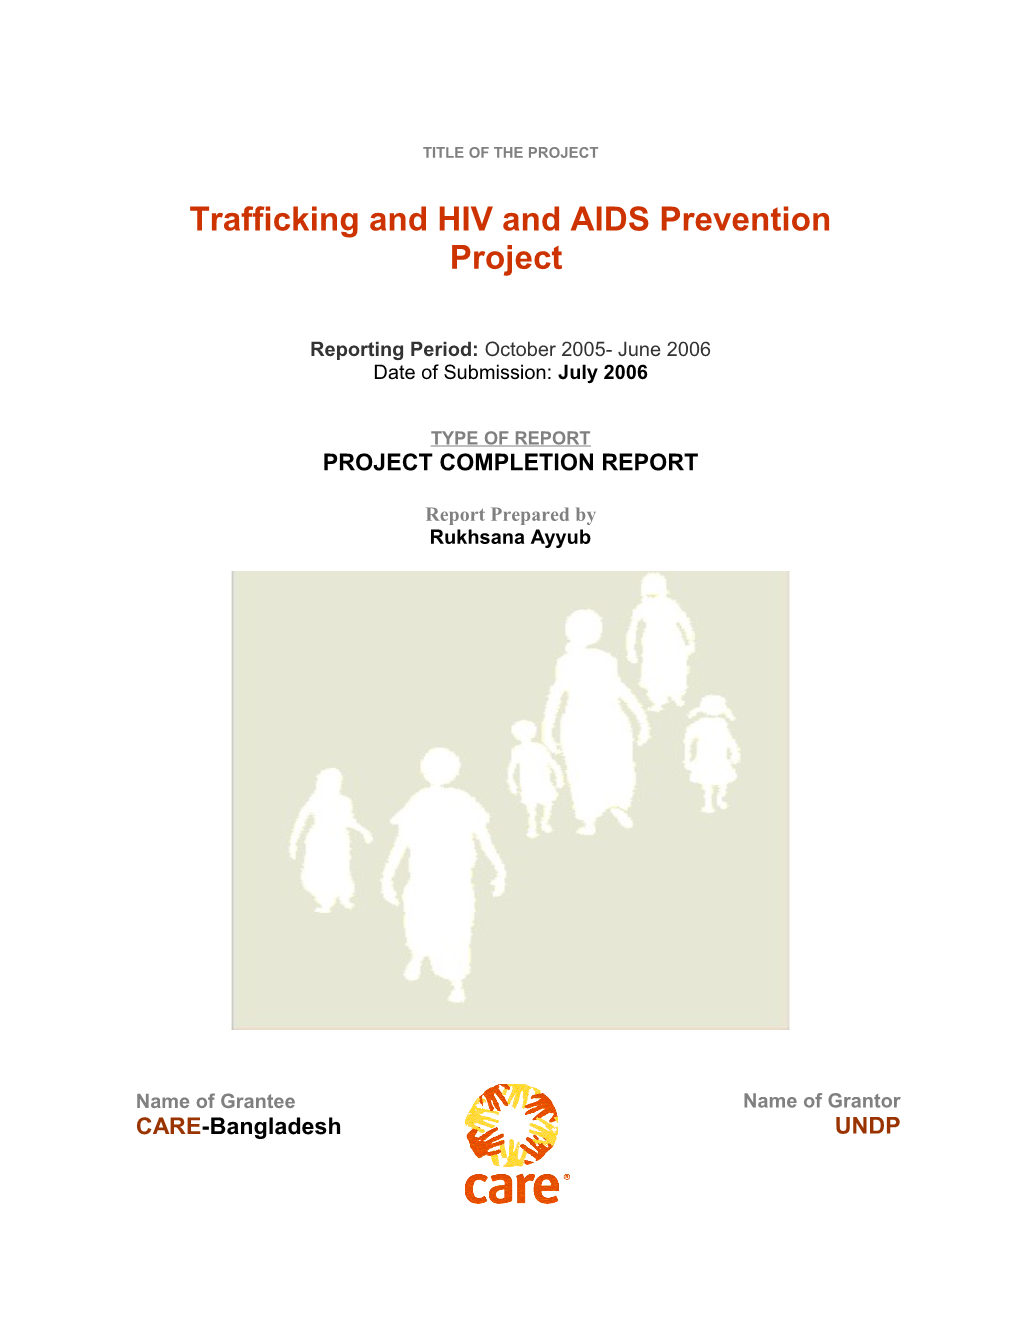 Trafficking and AIDS